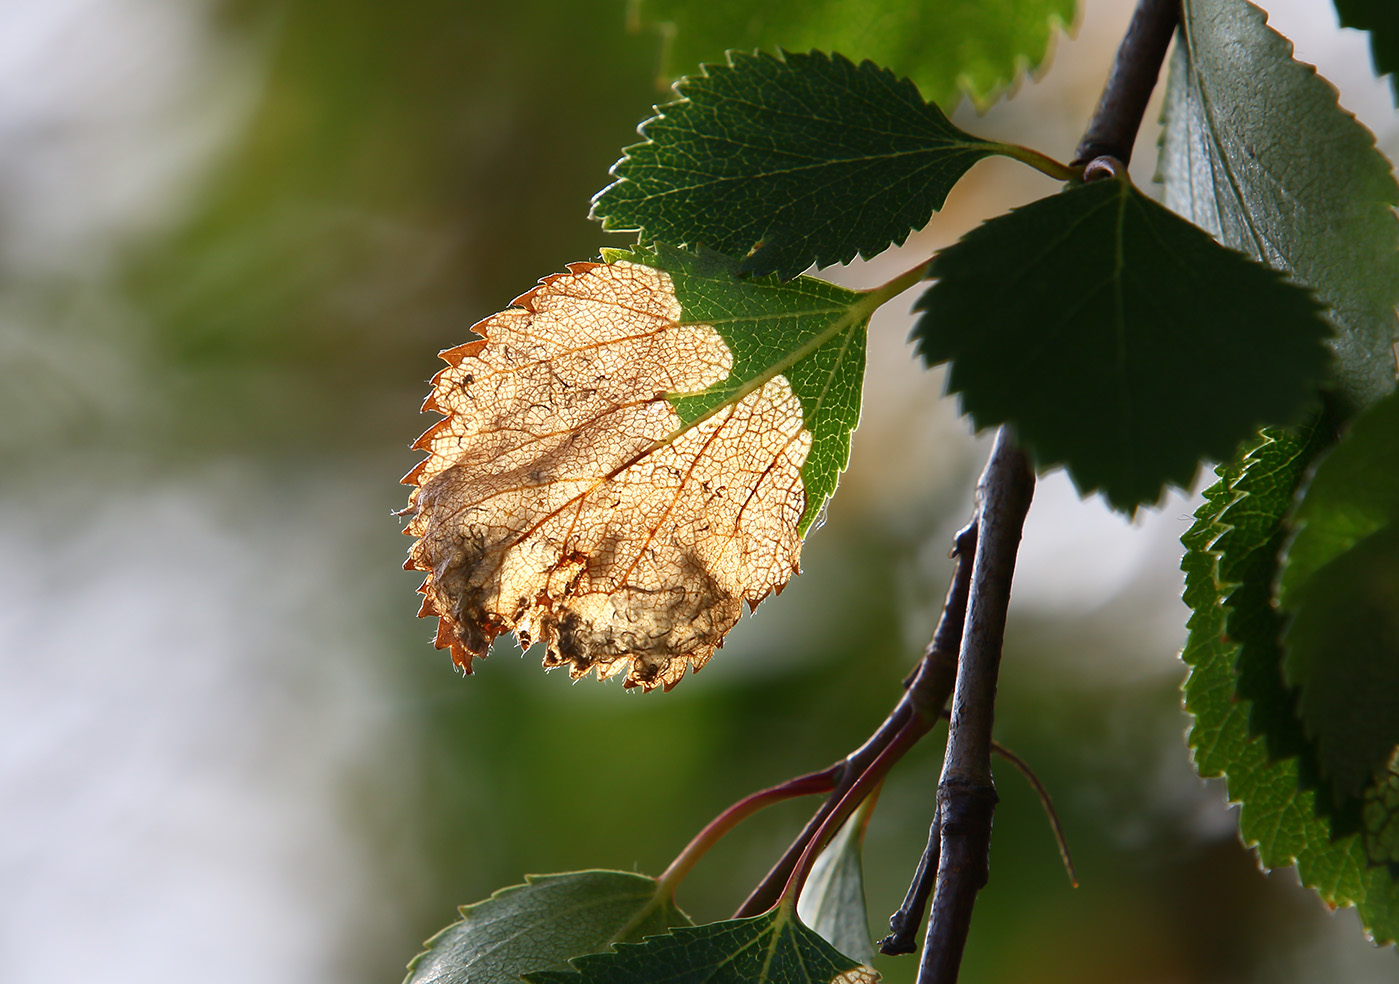 A downy birch leaf with traces of the larvae of white-spot purple. You can tell by the droppings from the larvae whether the tree has been attacked by the white-spot purple or the Scolioneura betuleti. The former emits thread-like droppings as shown here, while the droppings of the latter are tiny ball-shaped ones like on the heading photo. Photo: Pétur Halldórsson